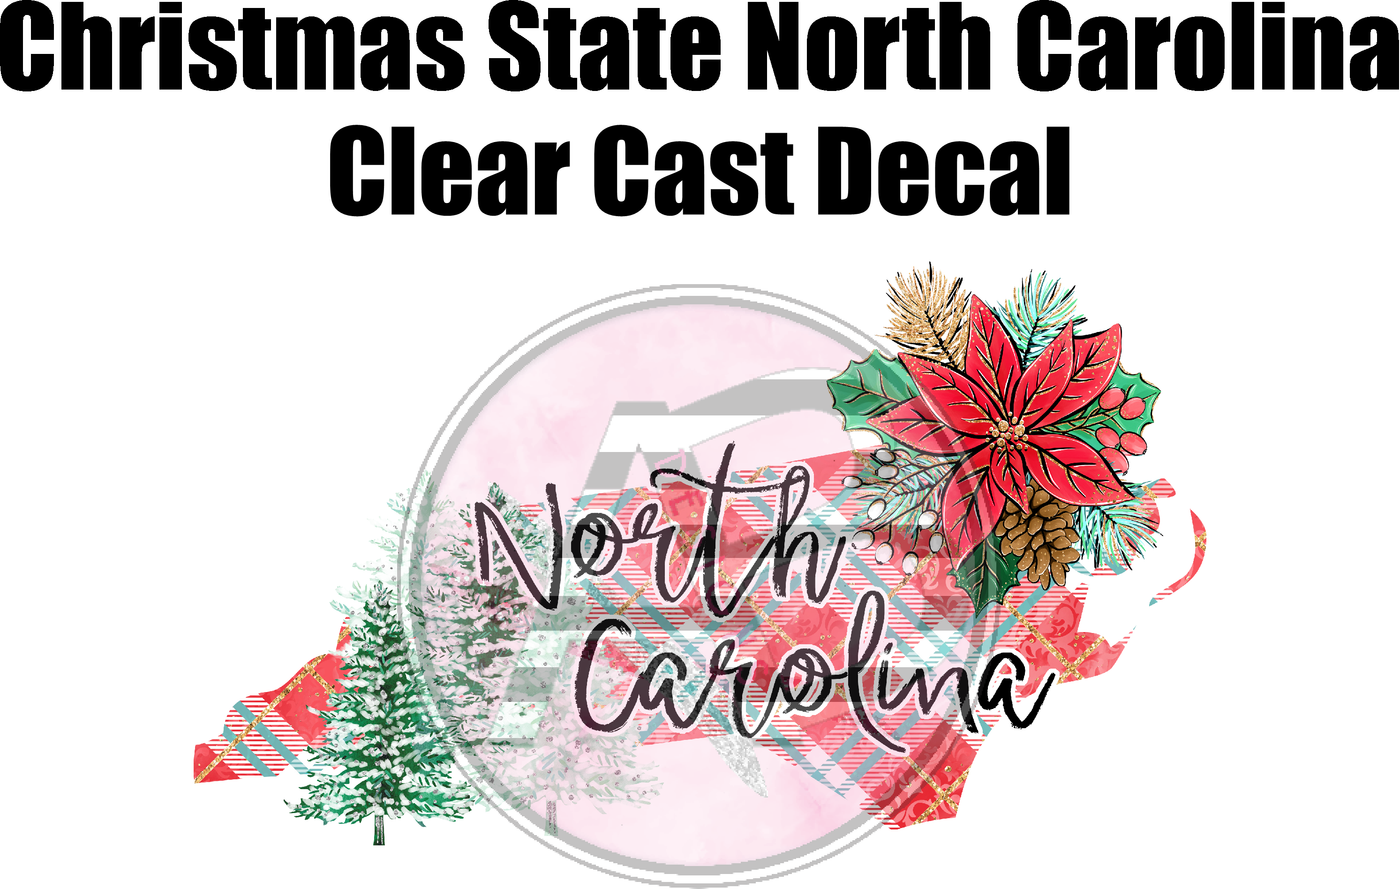 Christmas State North Carolina - Clear Cast Decal